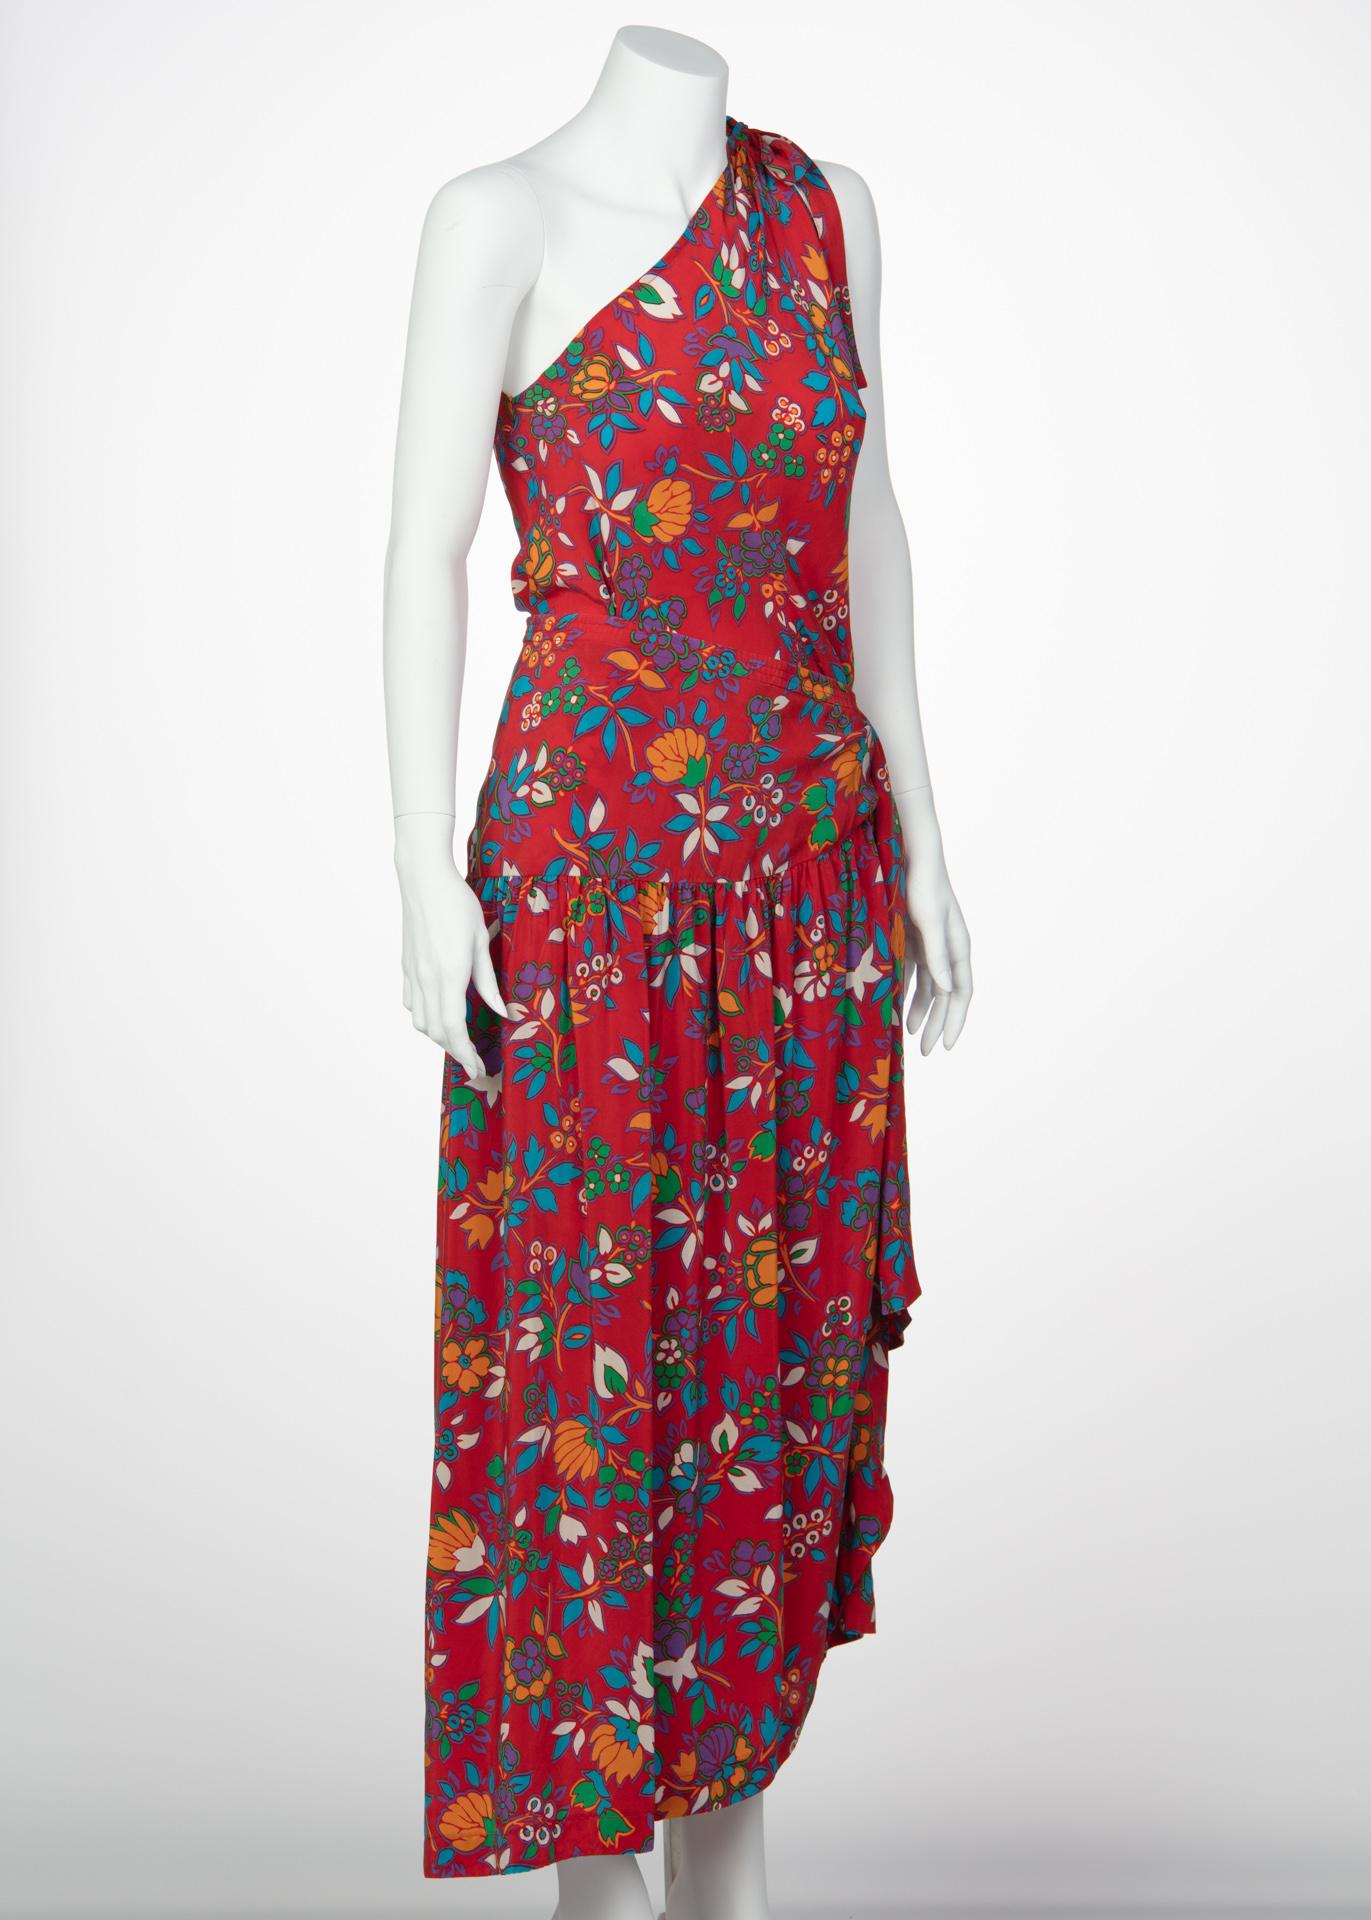 Yves Saint Laurent YSL Multicolor Floral Print Top and Skirt Set, 1980s  6